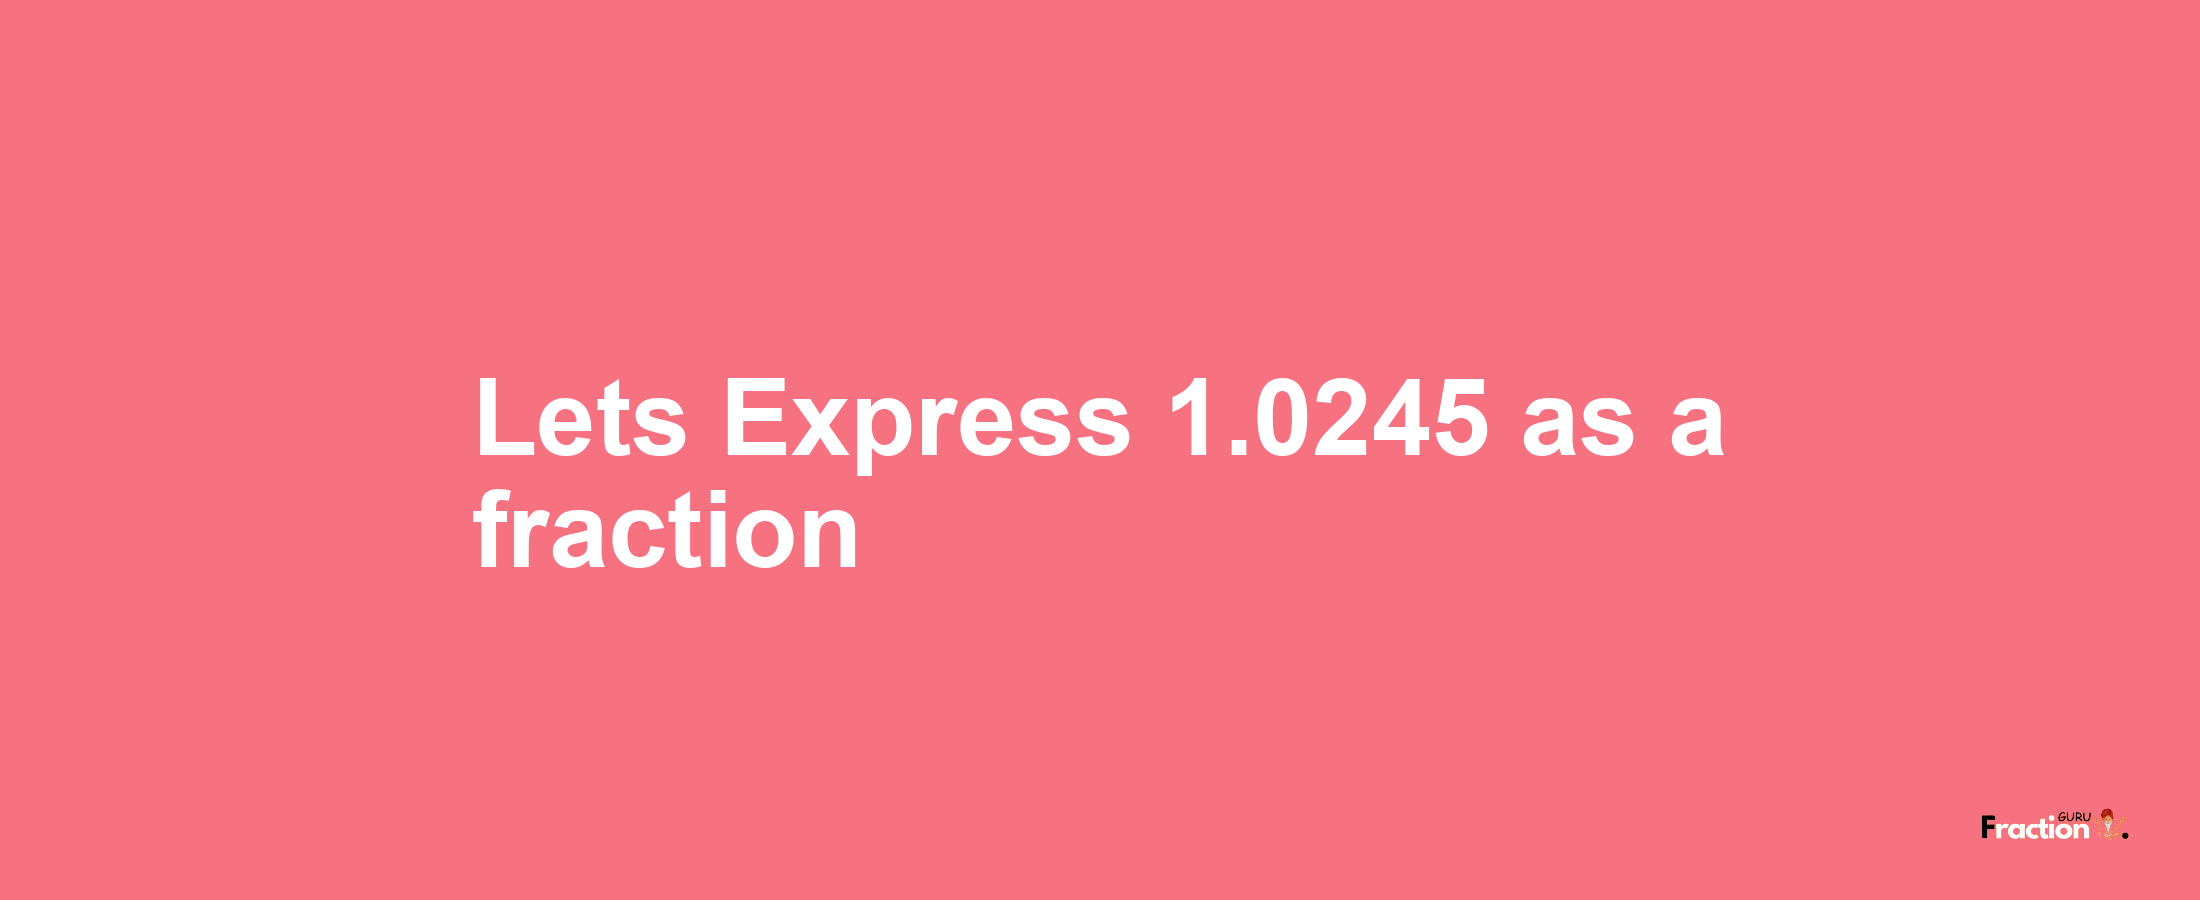 Lets Express 1.0245 as afraction